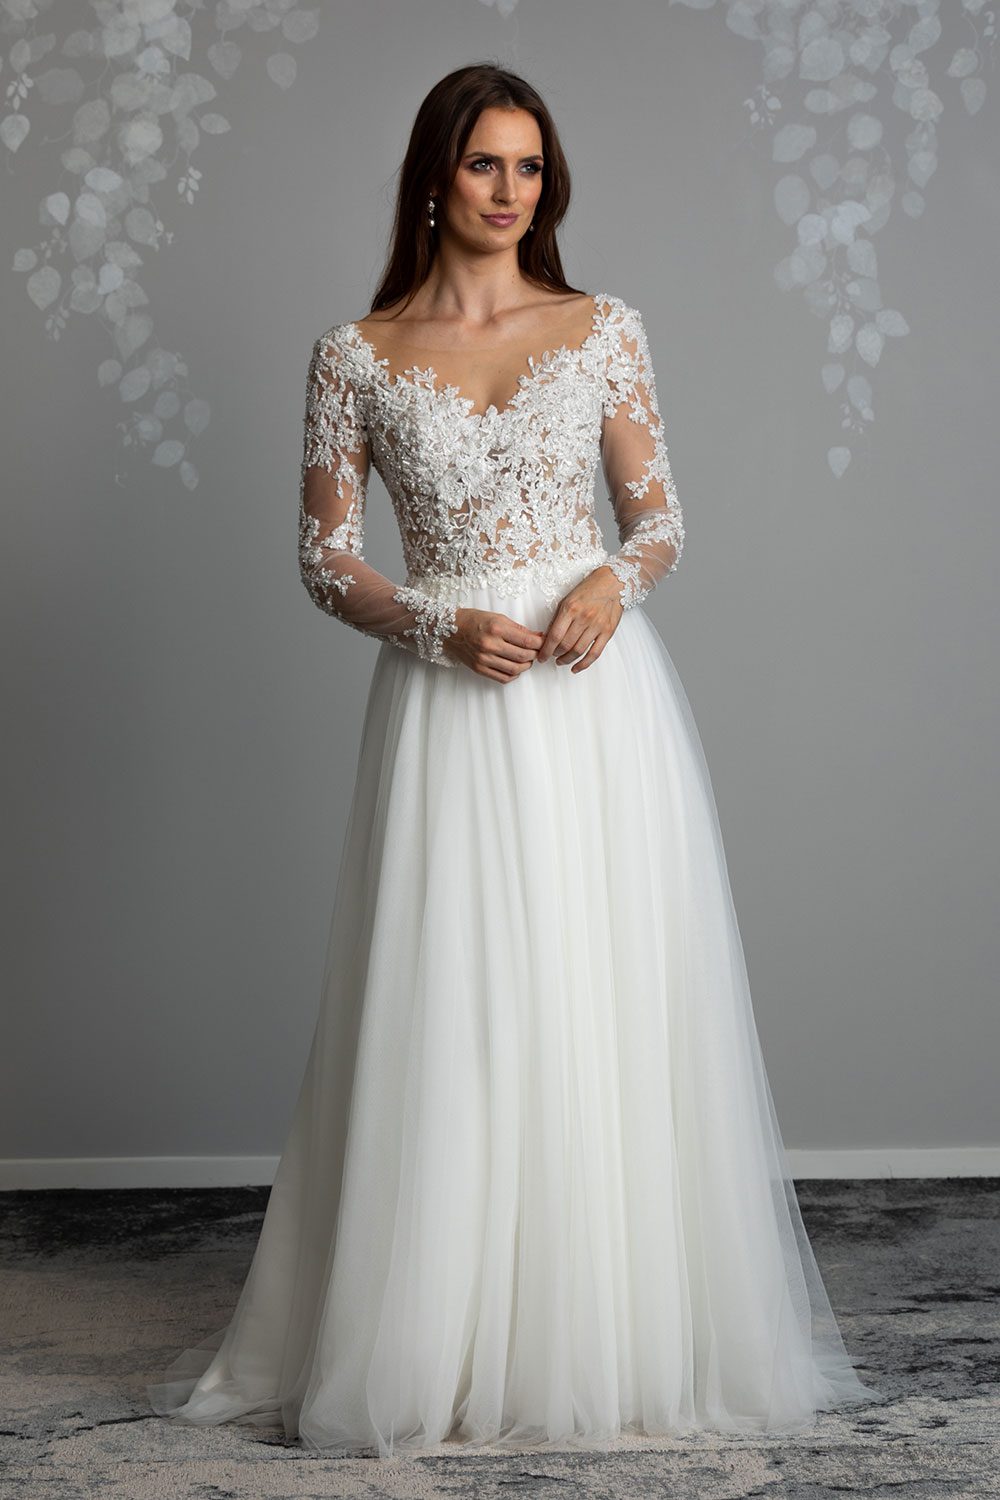 Maia Wedding gown from Vinka Design - This feminine & romantic wedding dress features beautiful pearl & bead embroidery over 3D lace. Long sleeves with pearl buttons, illusion neckline and skirt of dreamy layers of soft tulle. Full length view of the front of the gown displaying the delicate lace and embroidery on the bodice with long tulle skirt